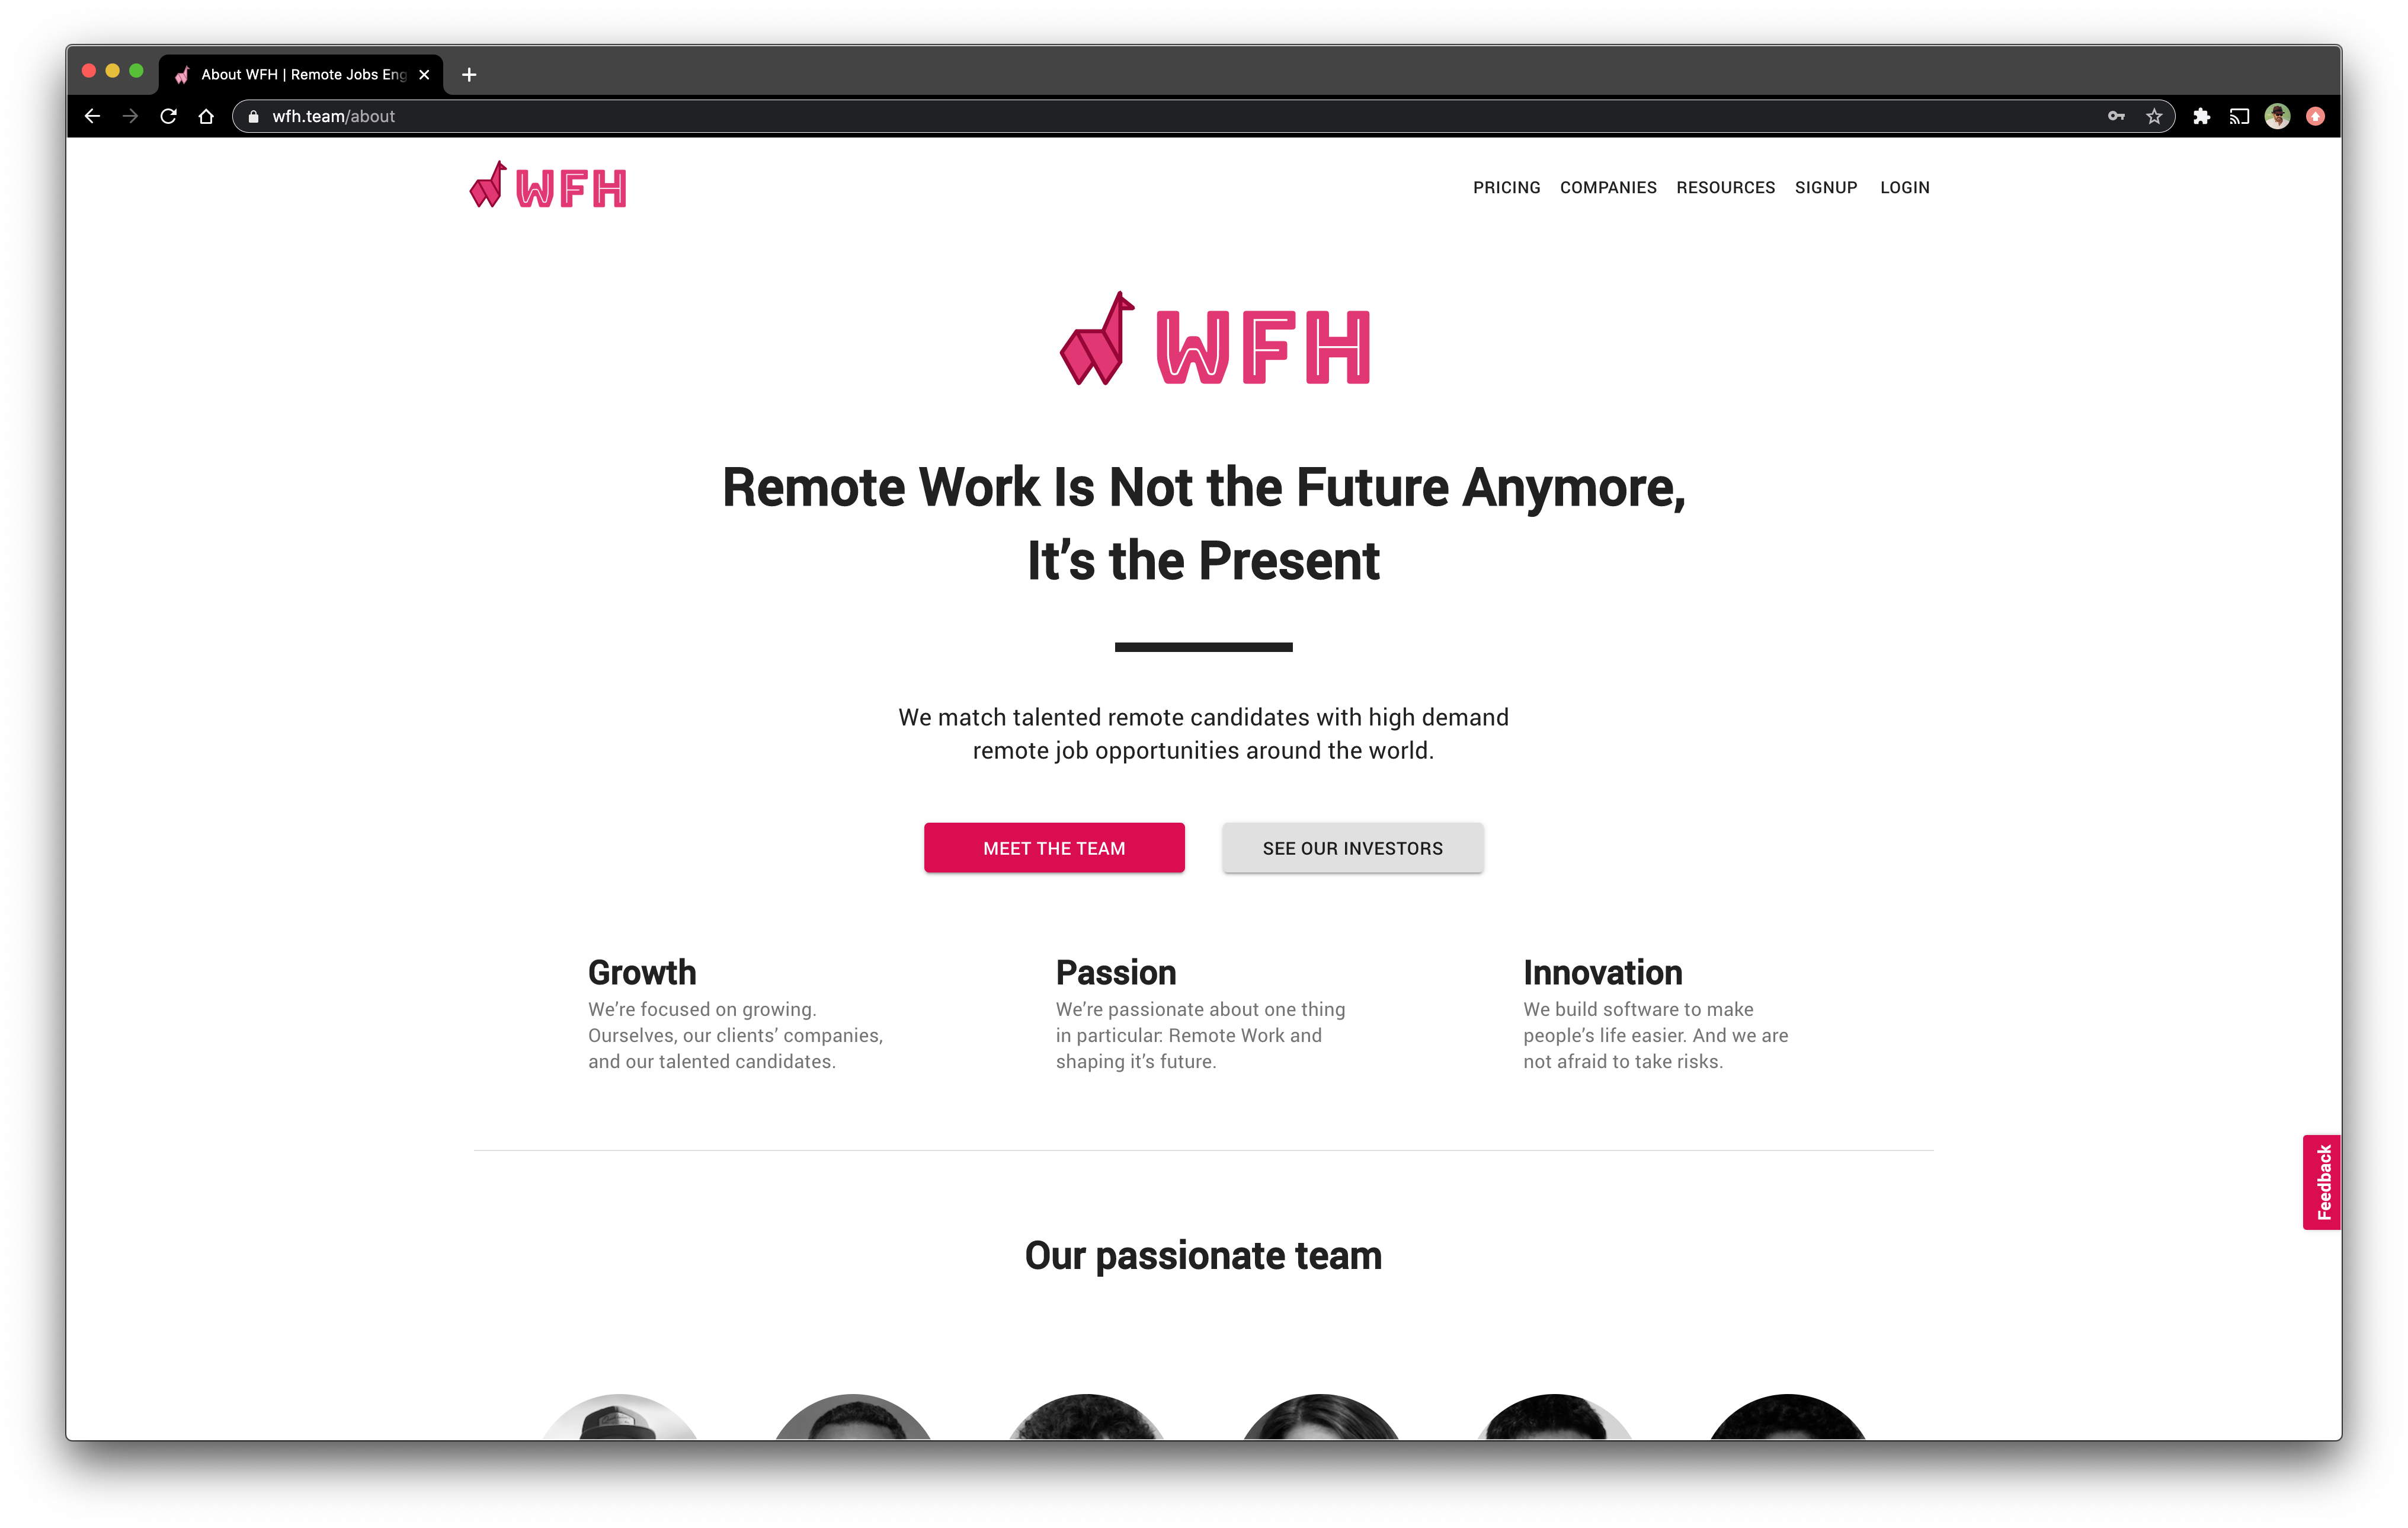 Get feedback from a vast remote working audience about WFH